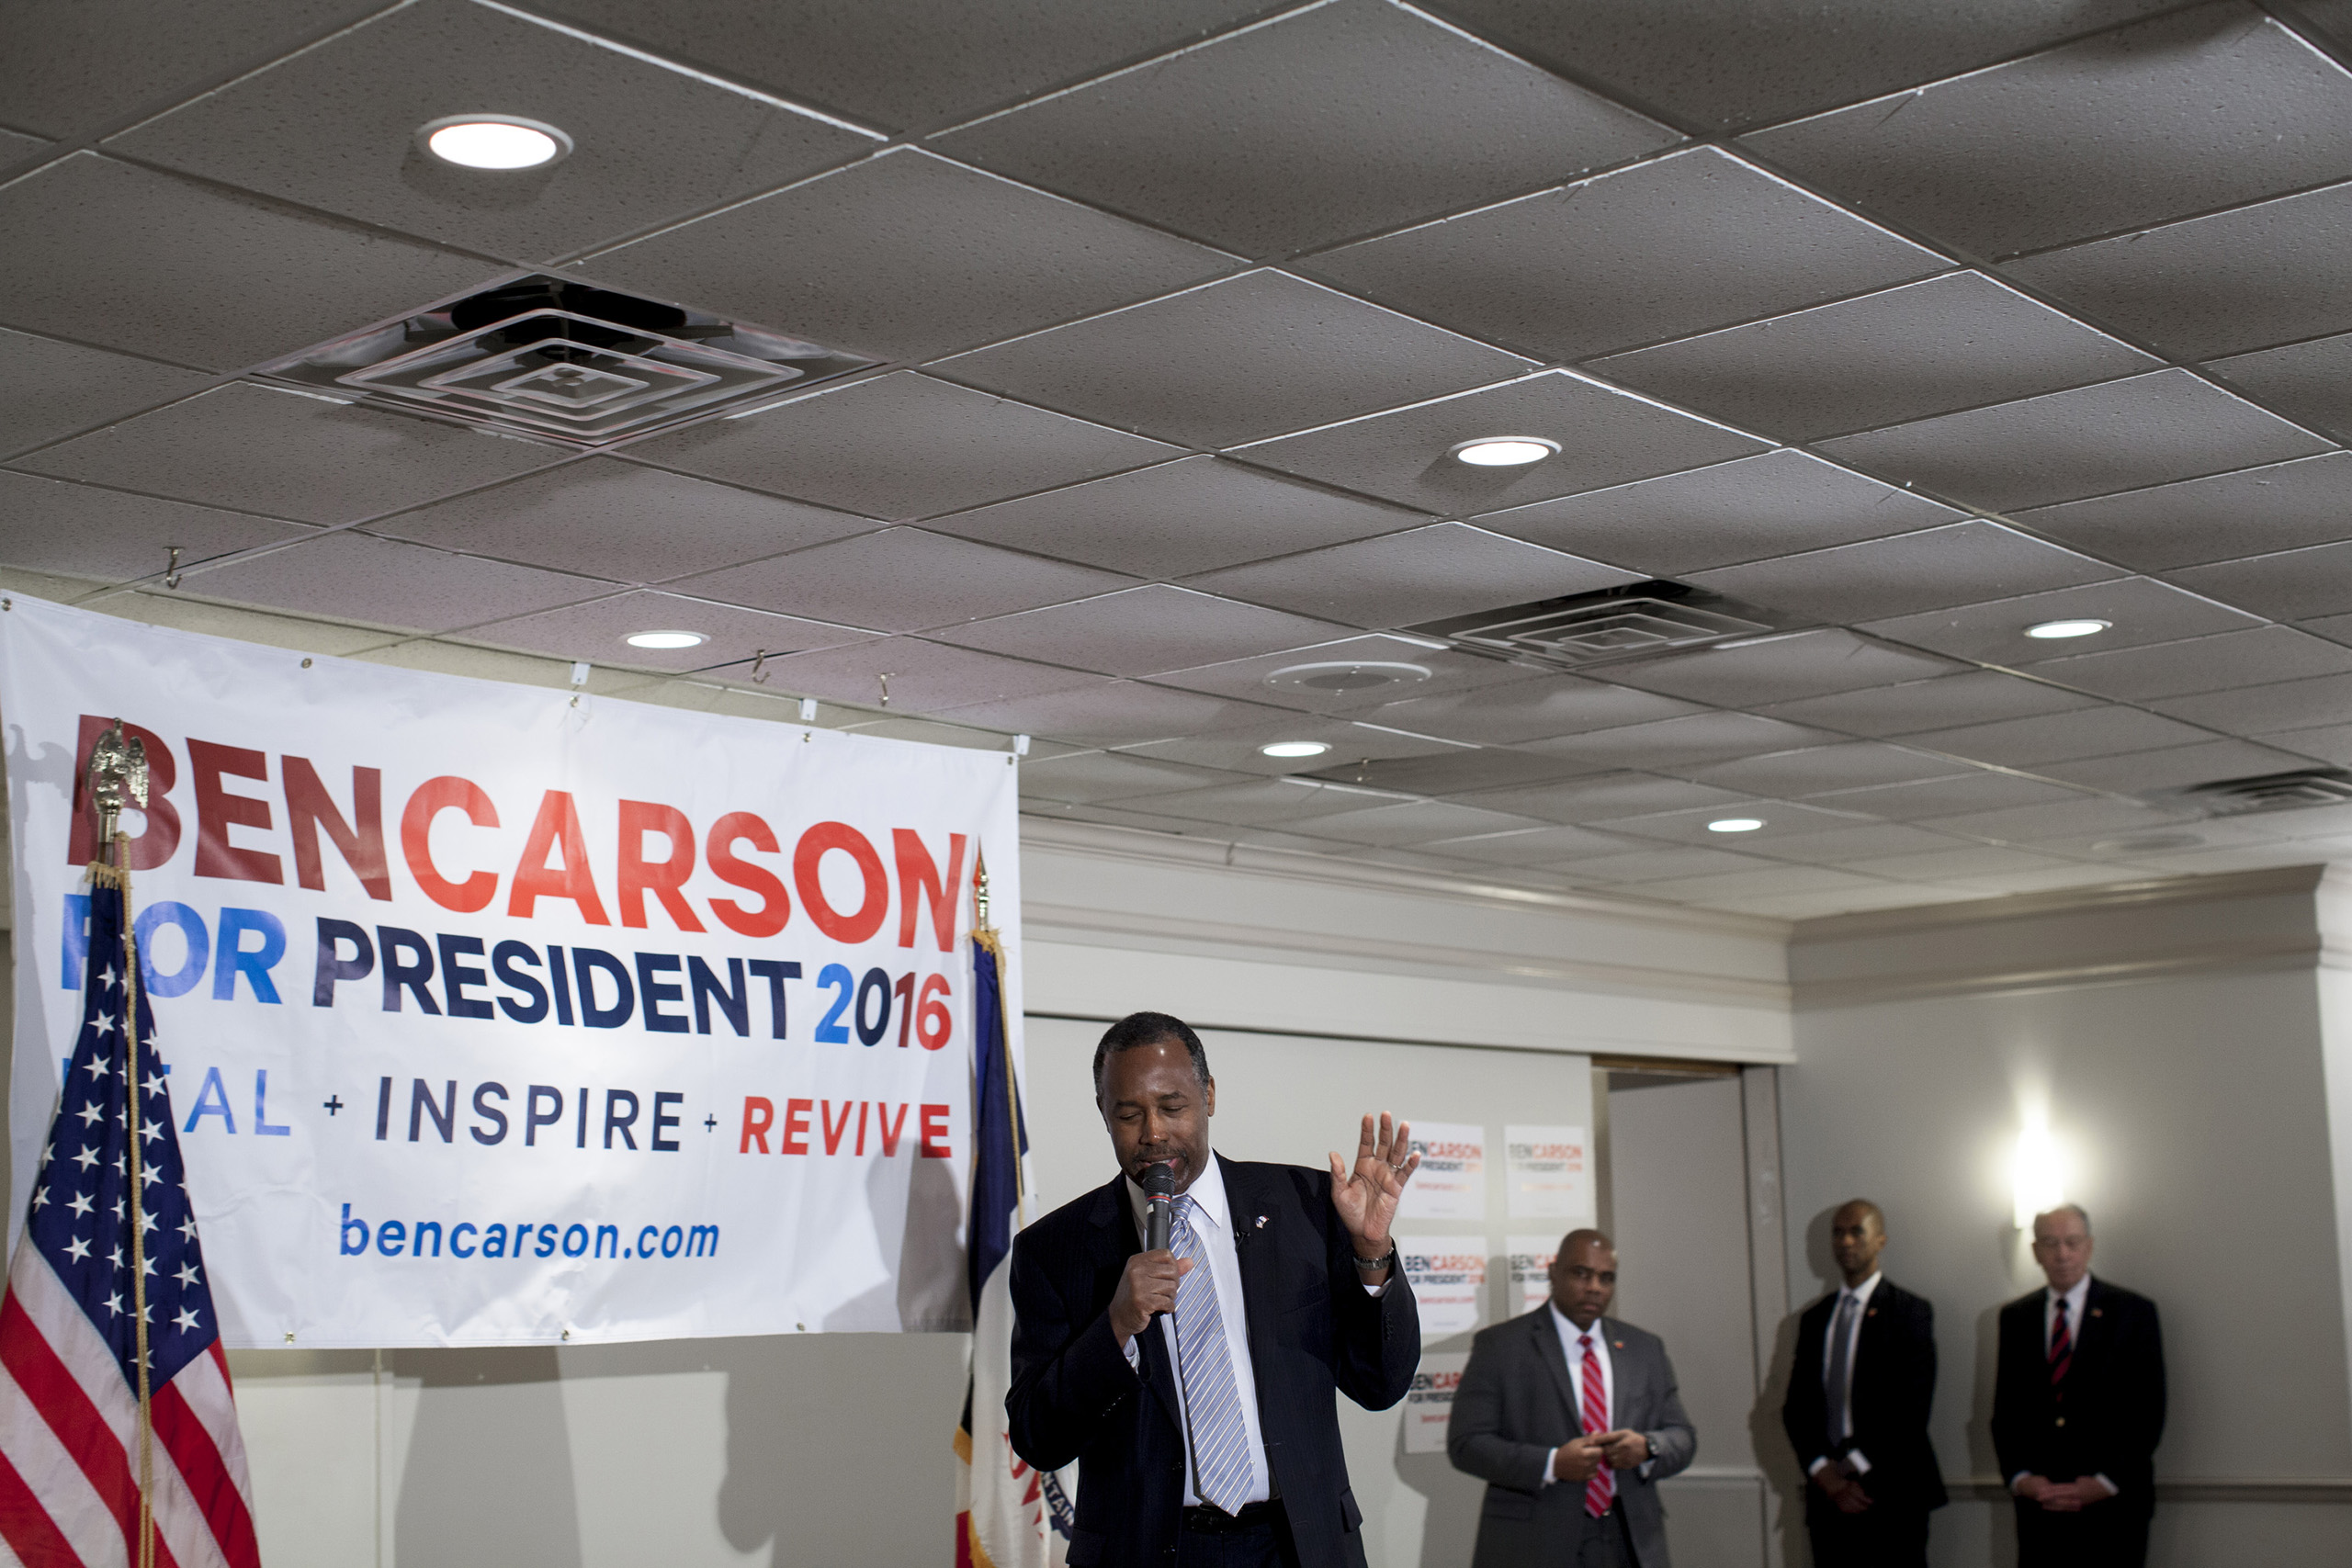 Ben Carson spoke to supporters this afternoon at The University Club in Iowa City on January 29th. (Natalie Keyssar—Natalie Keyssar for TIME)